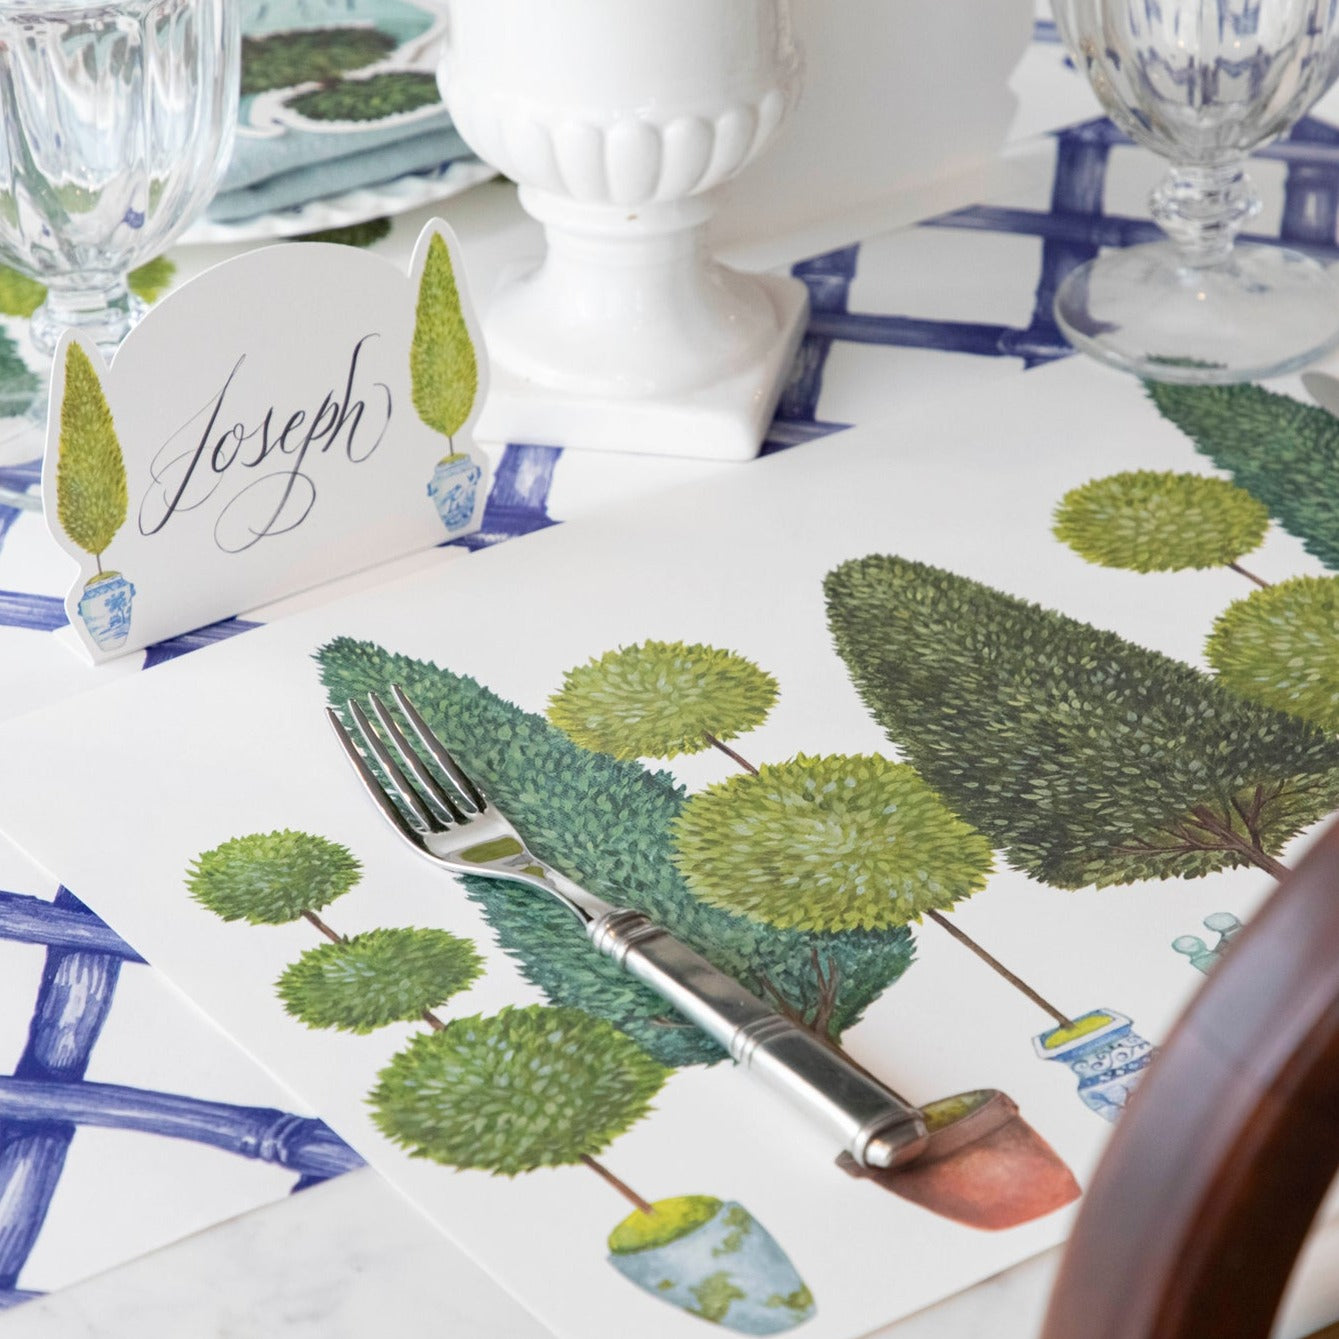 Close-up of the Topiary Garden Placemat in a place setting, showing the illustrated foliage in detail.